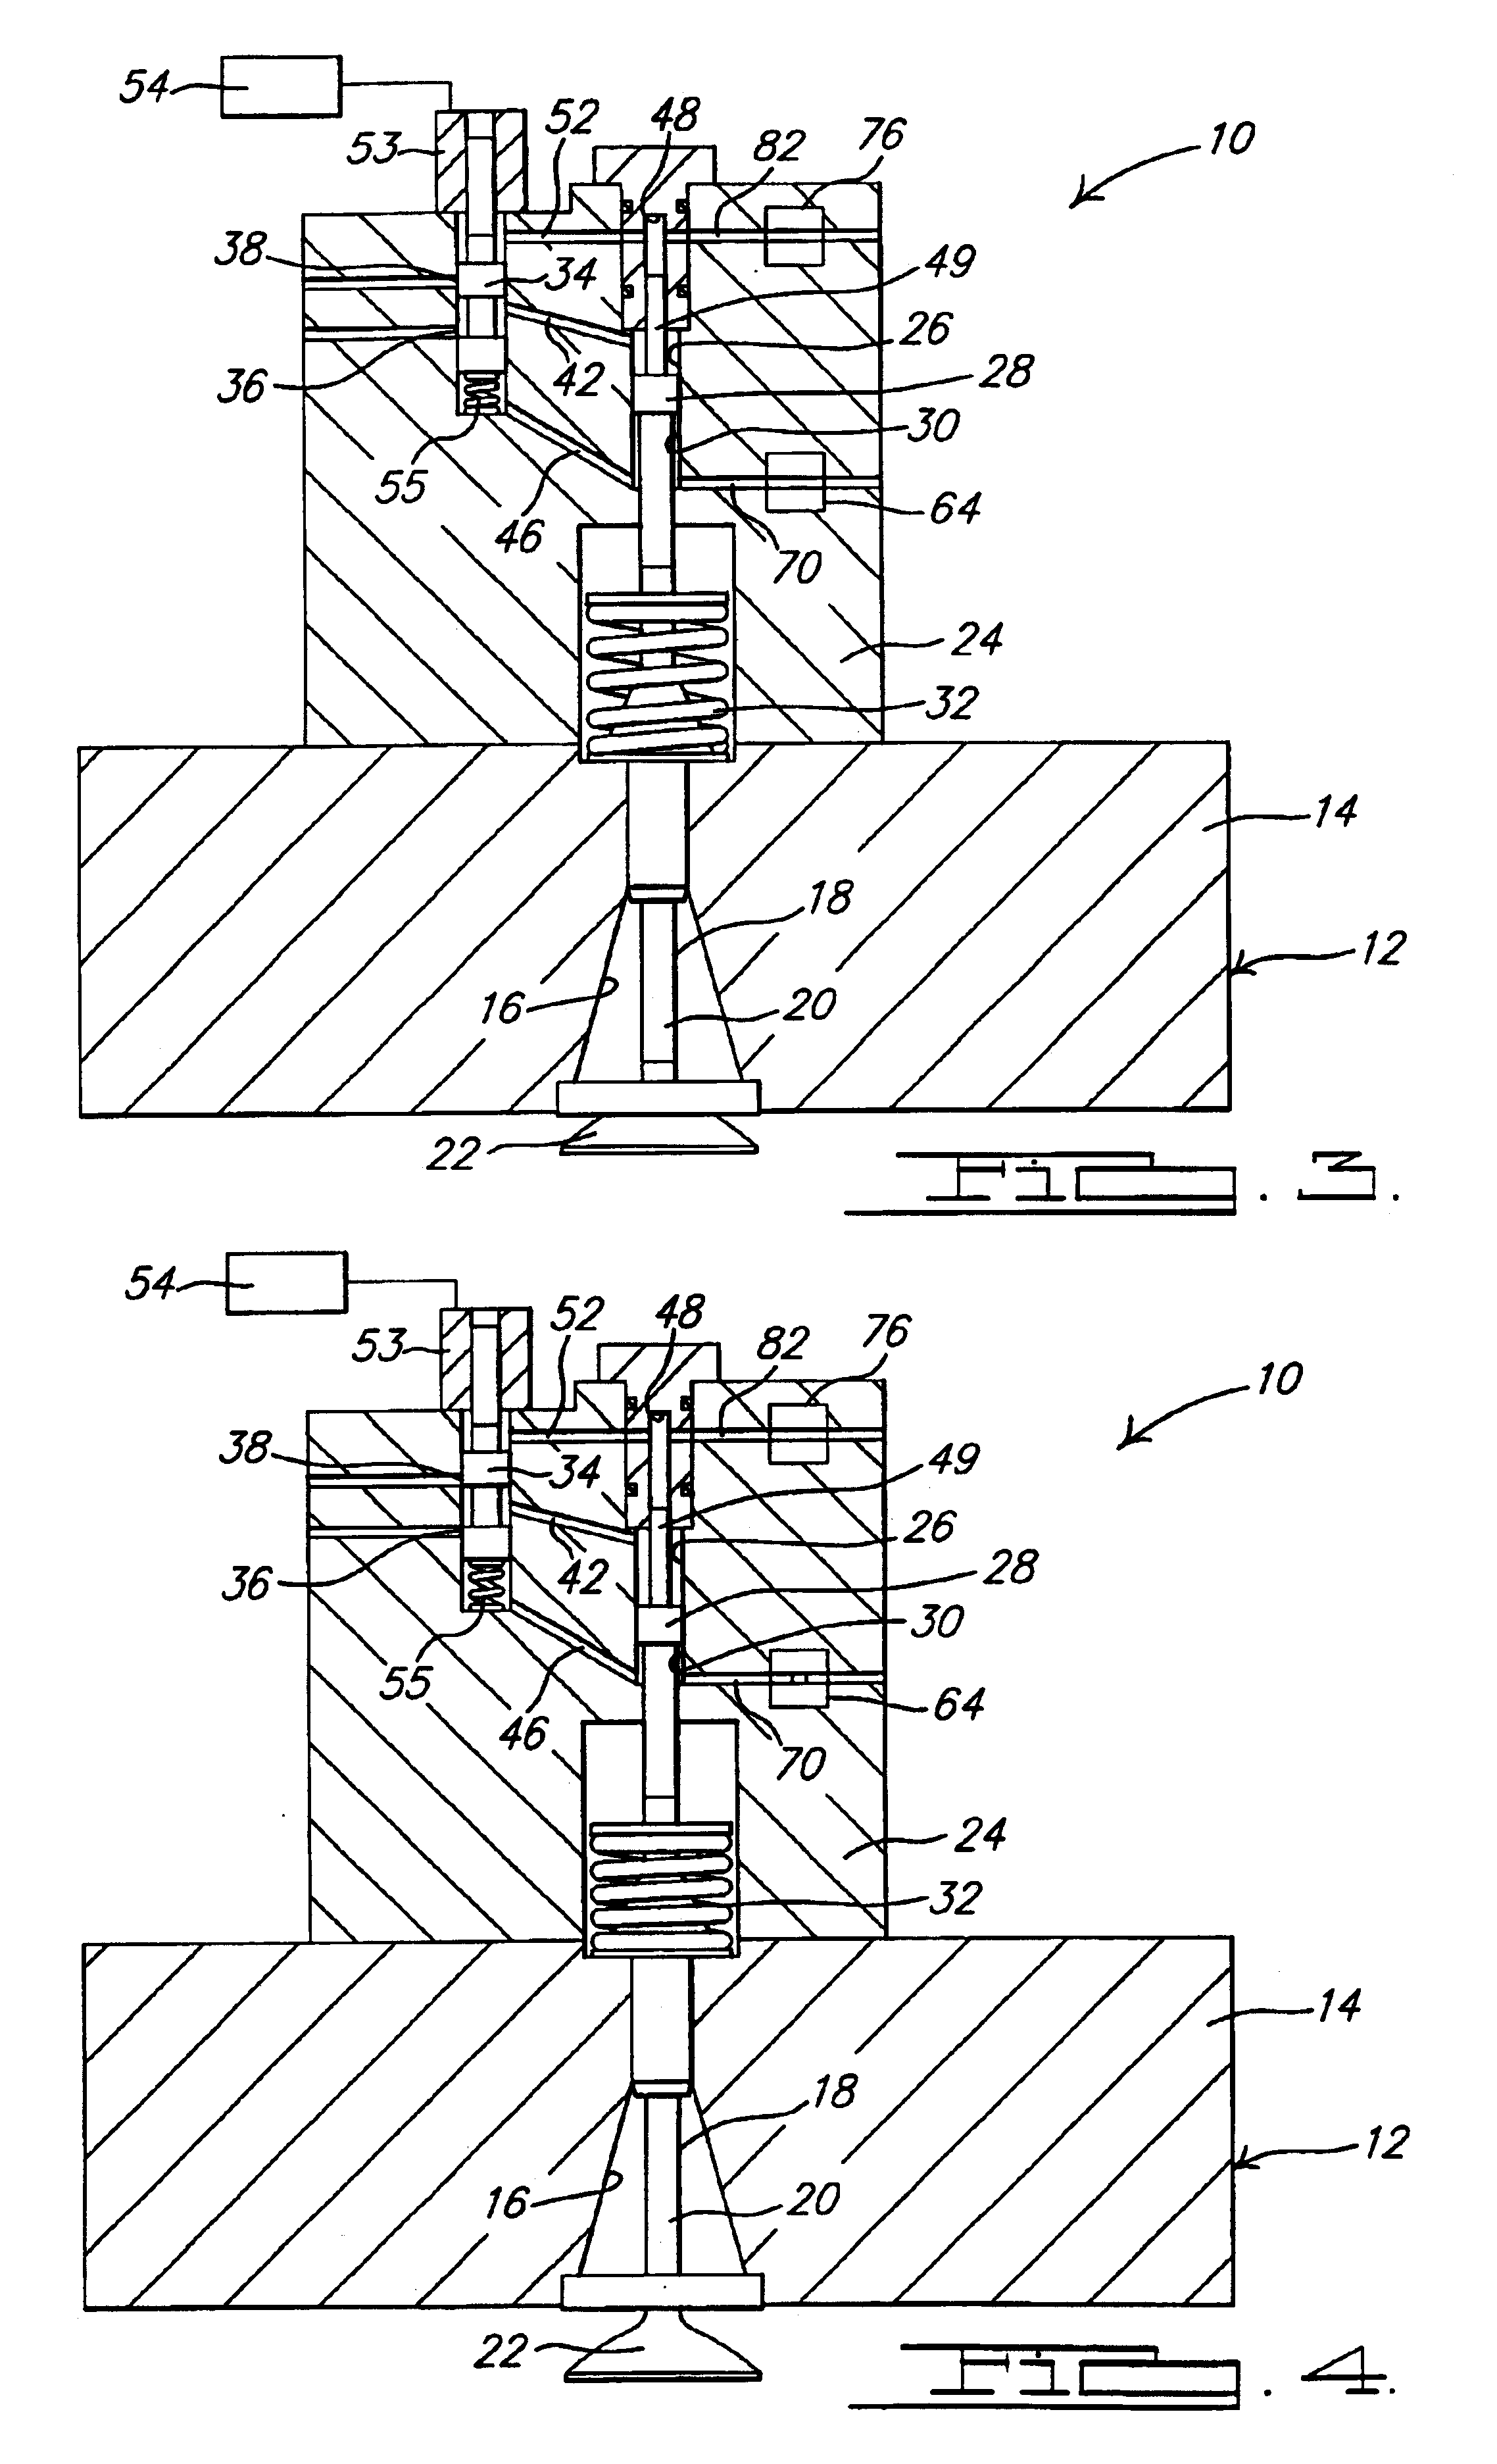 Engine valve actuator assembly with dual hydraulic feedback